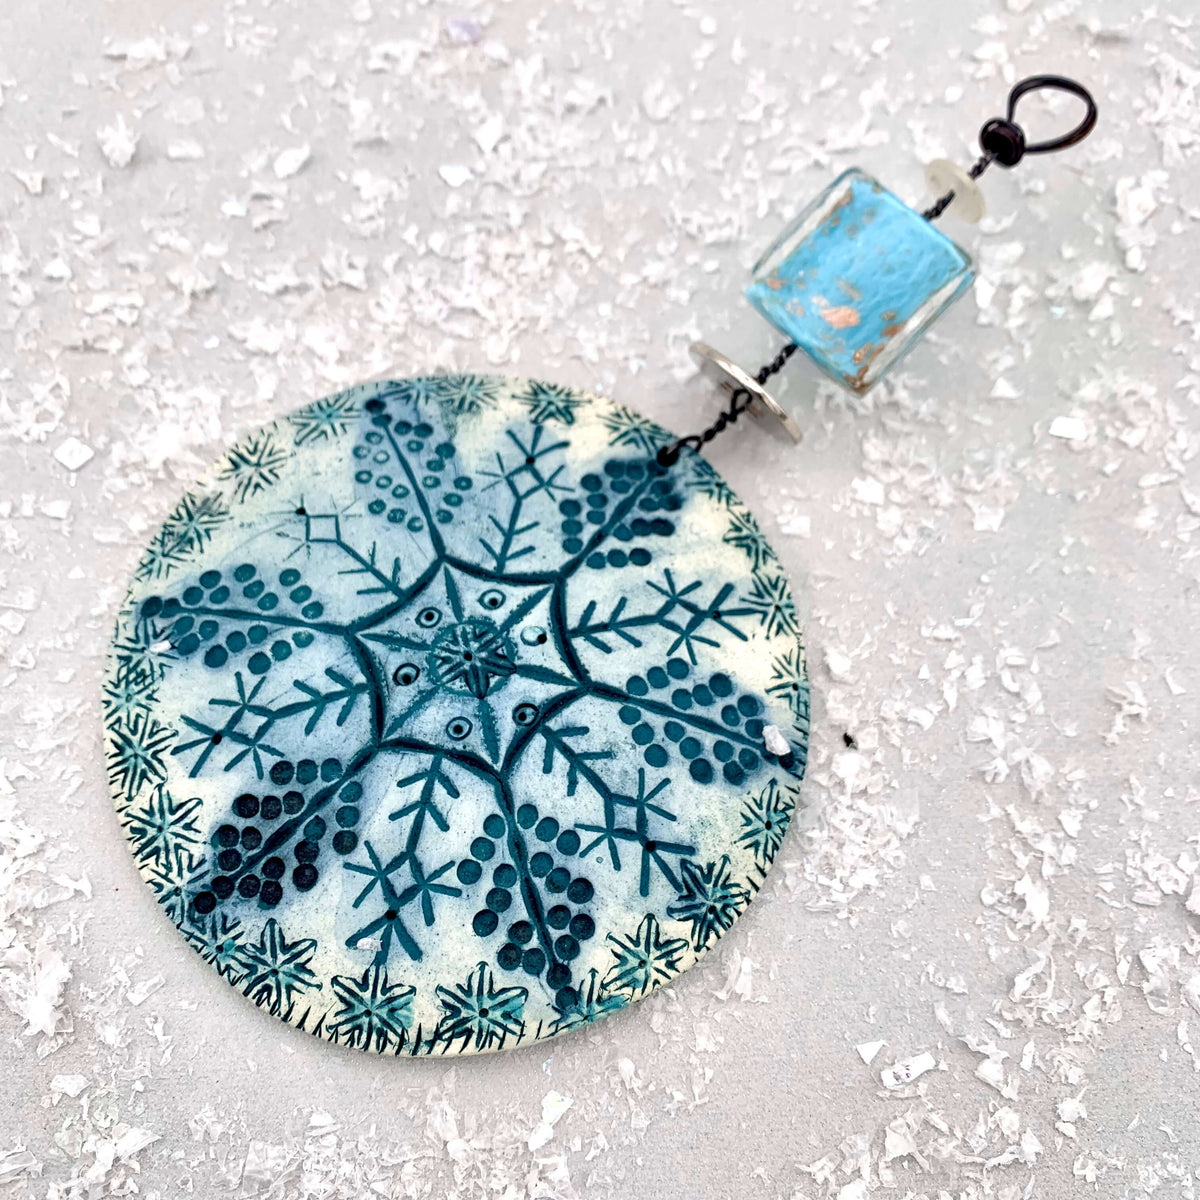 Handmade ceramic snowflake hanging decoration by Shirley Vauvelle. Featuring a handmade ceramic disk, with a snowflake pattern printed on with blue glazing, hanging from a thick wire with a blue button. Made in the uk.